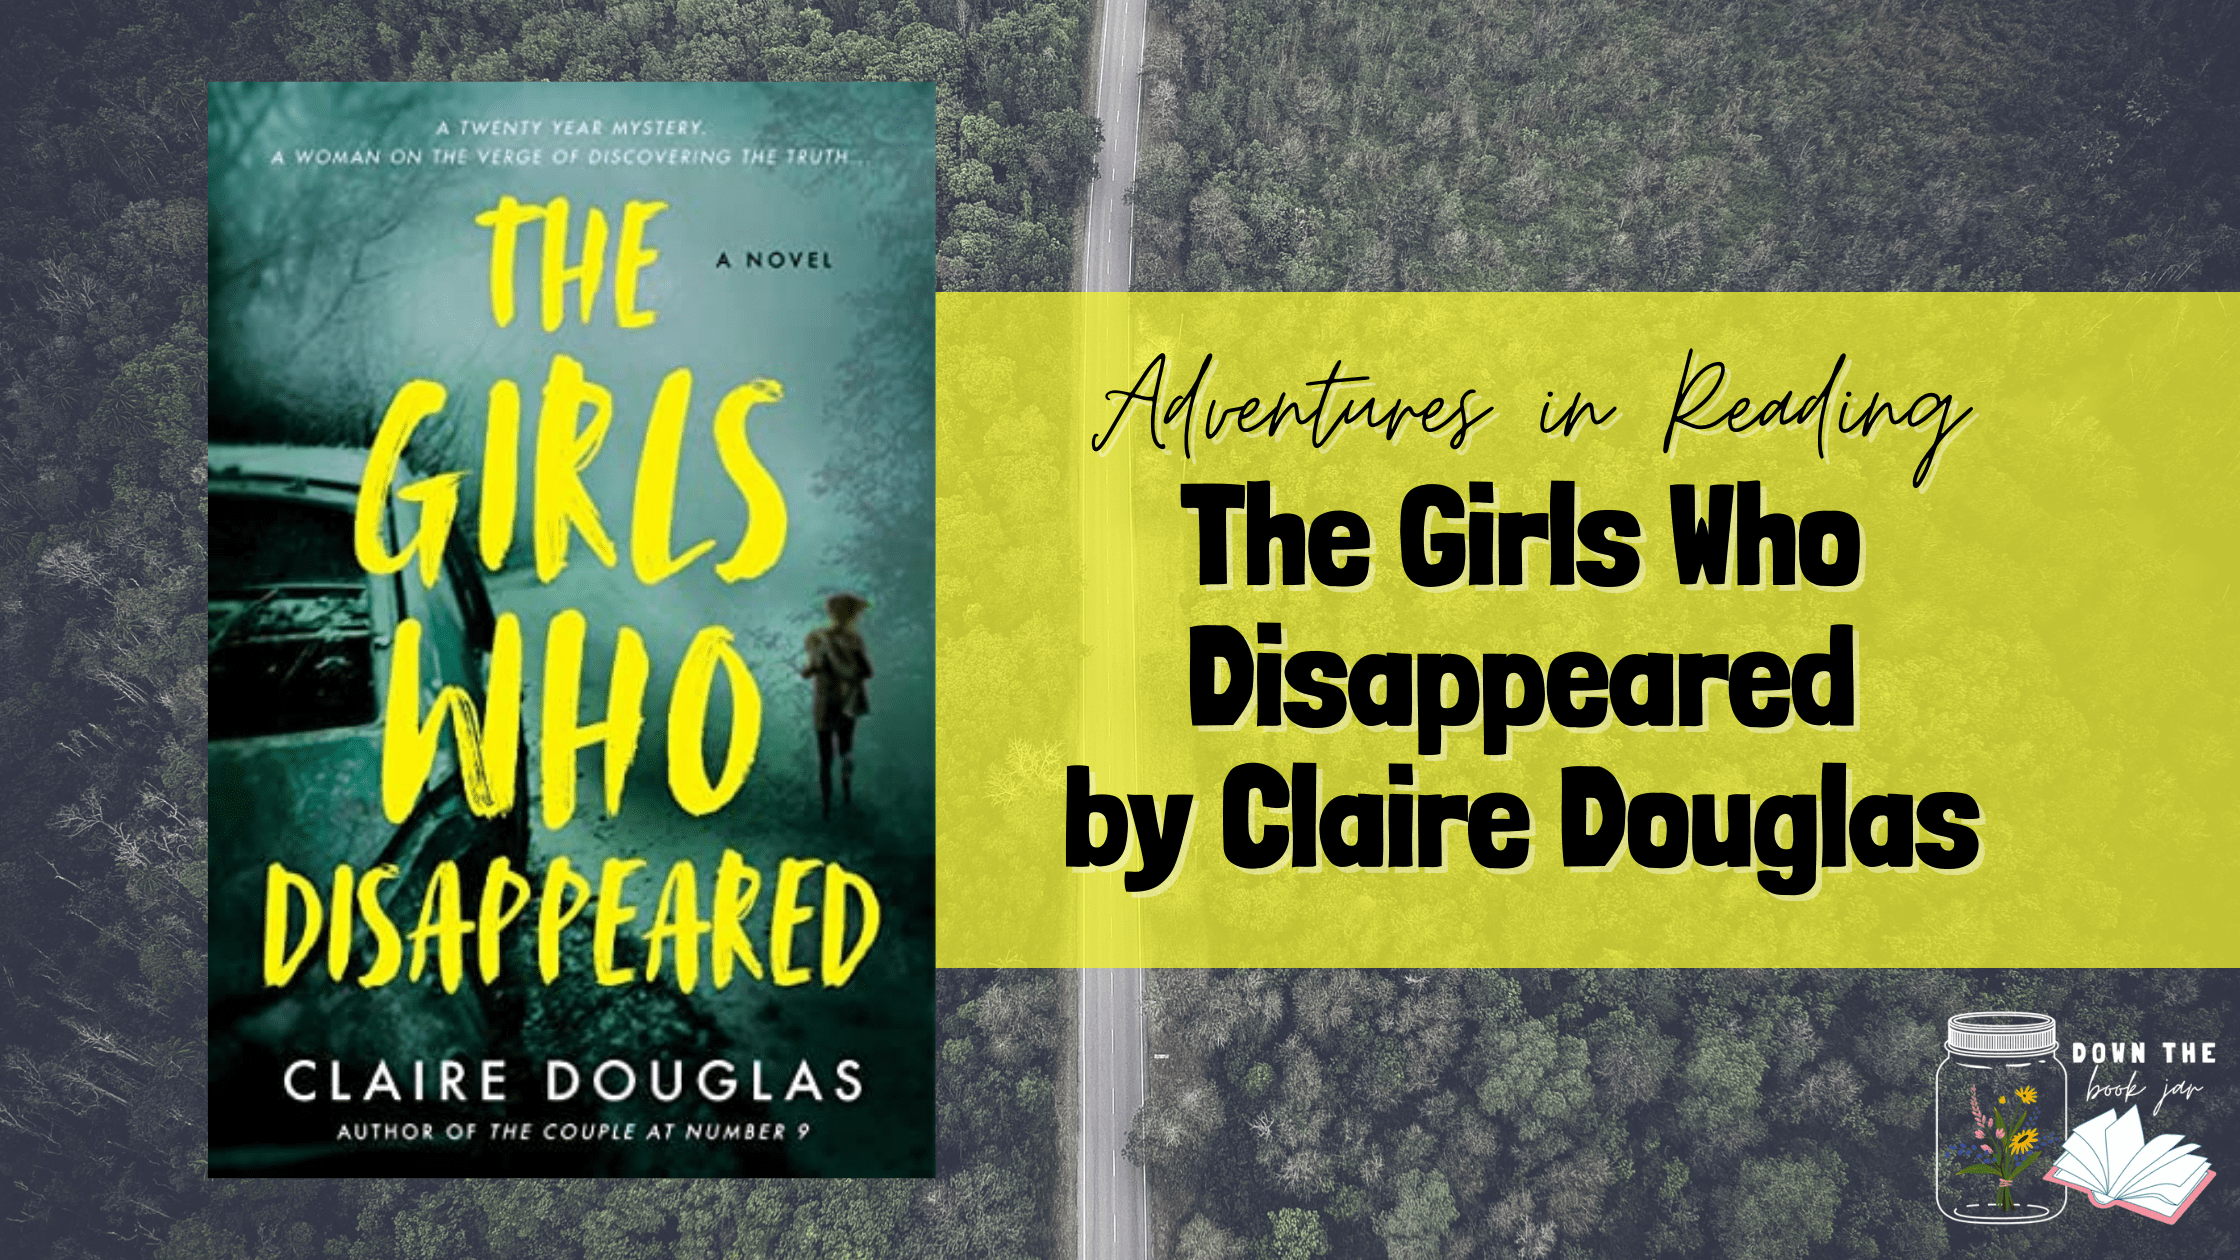 The Girls Who Disappeared by Claire Douglas